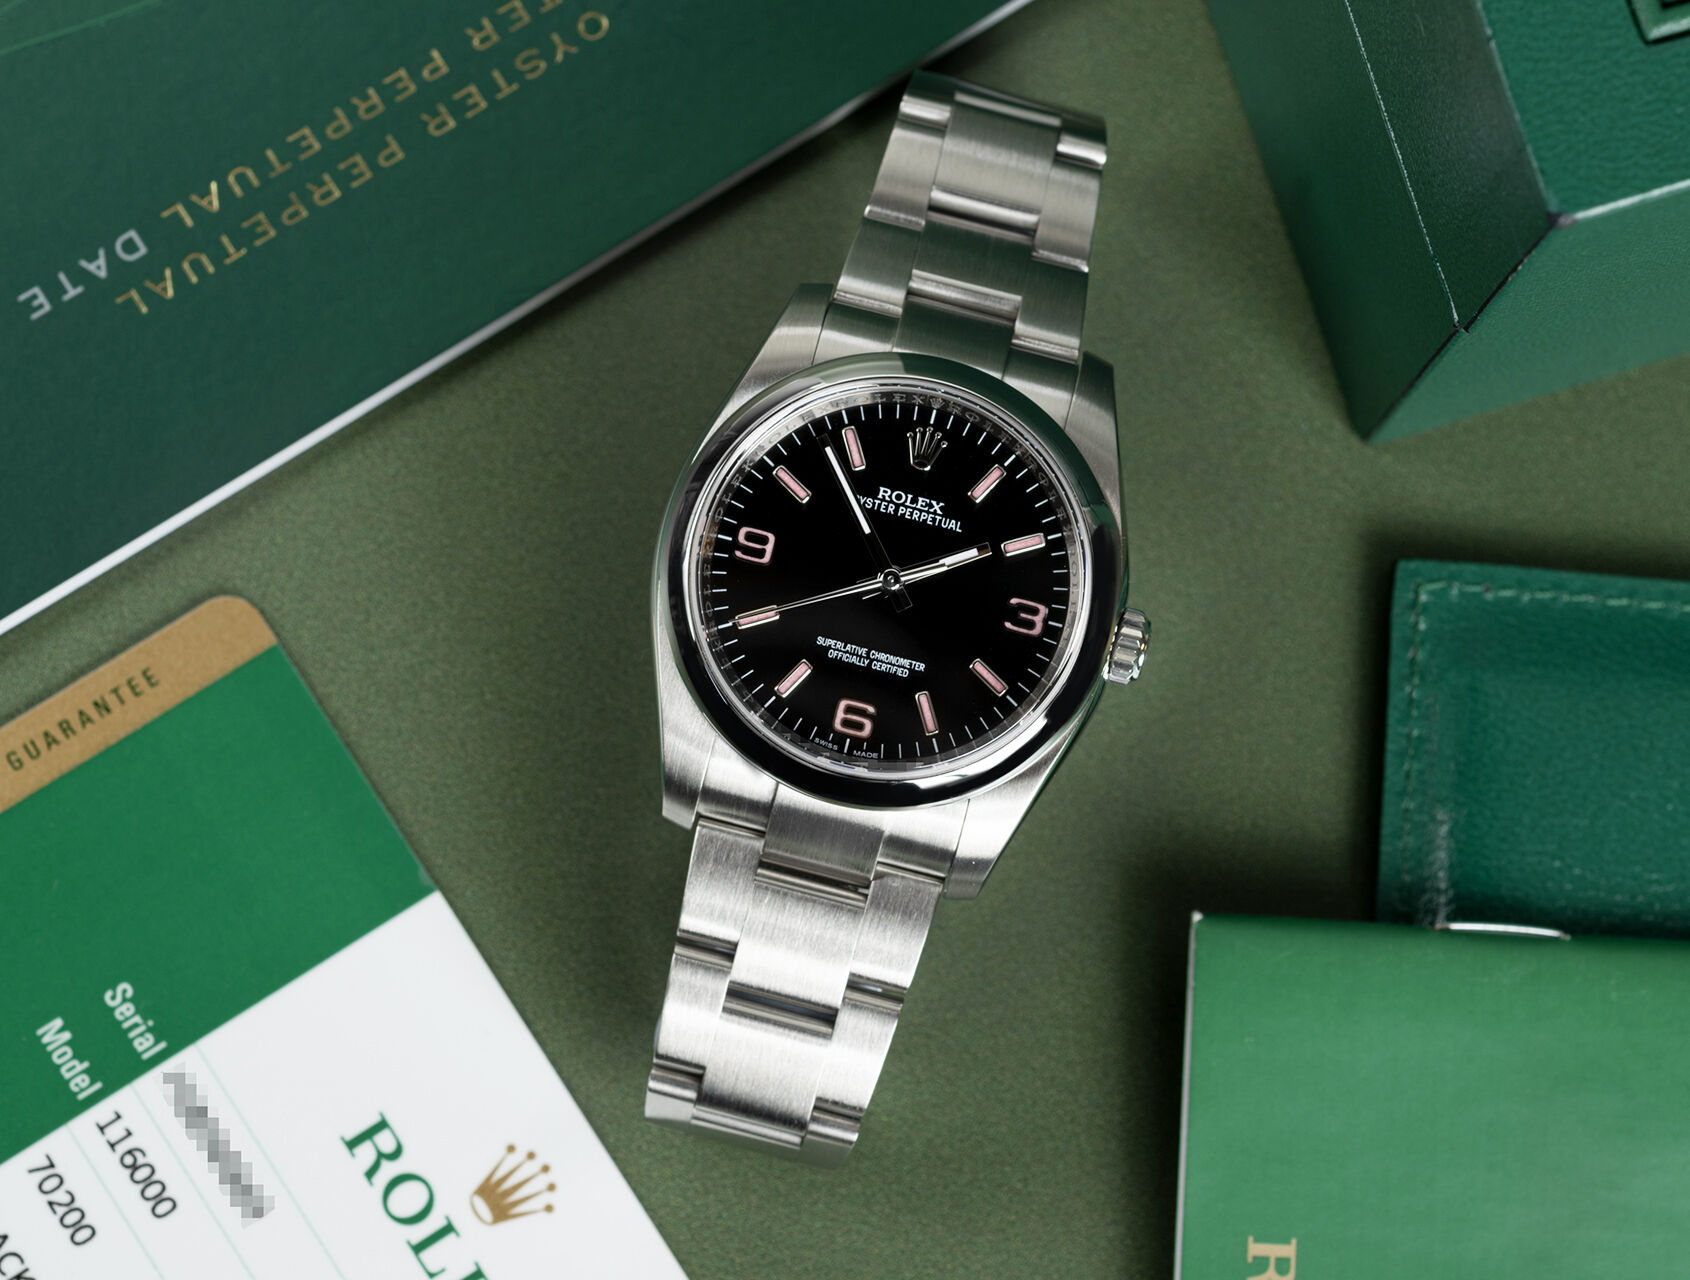 ref 116000 | 116000 - UK Retailed | Rolex Oyster Perpetual